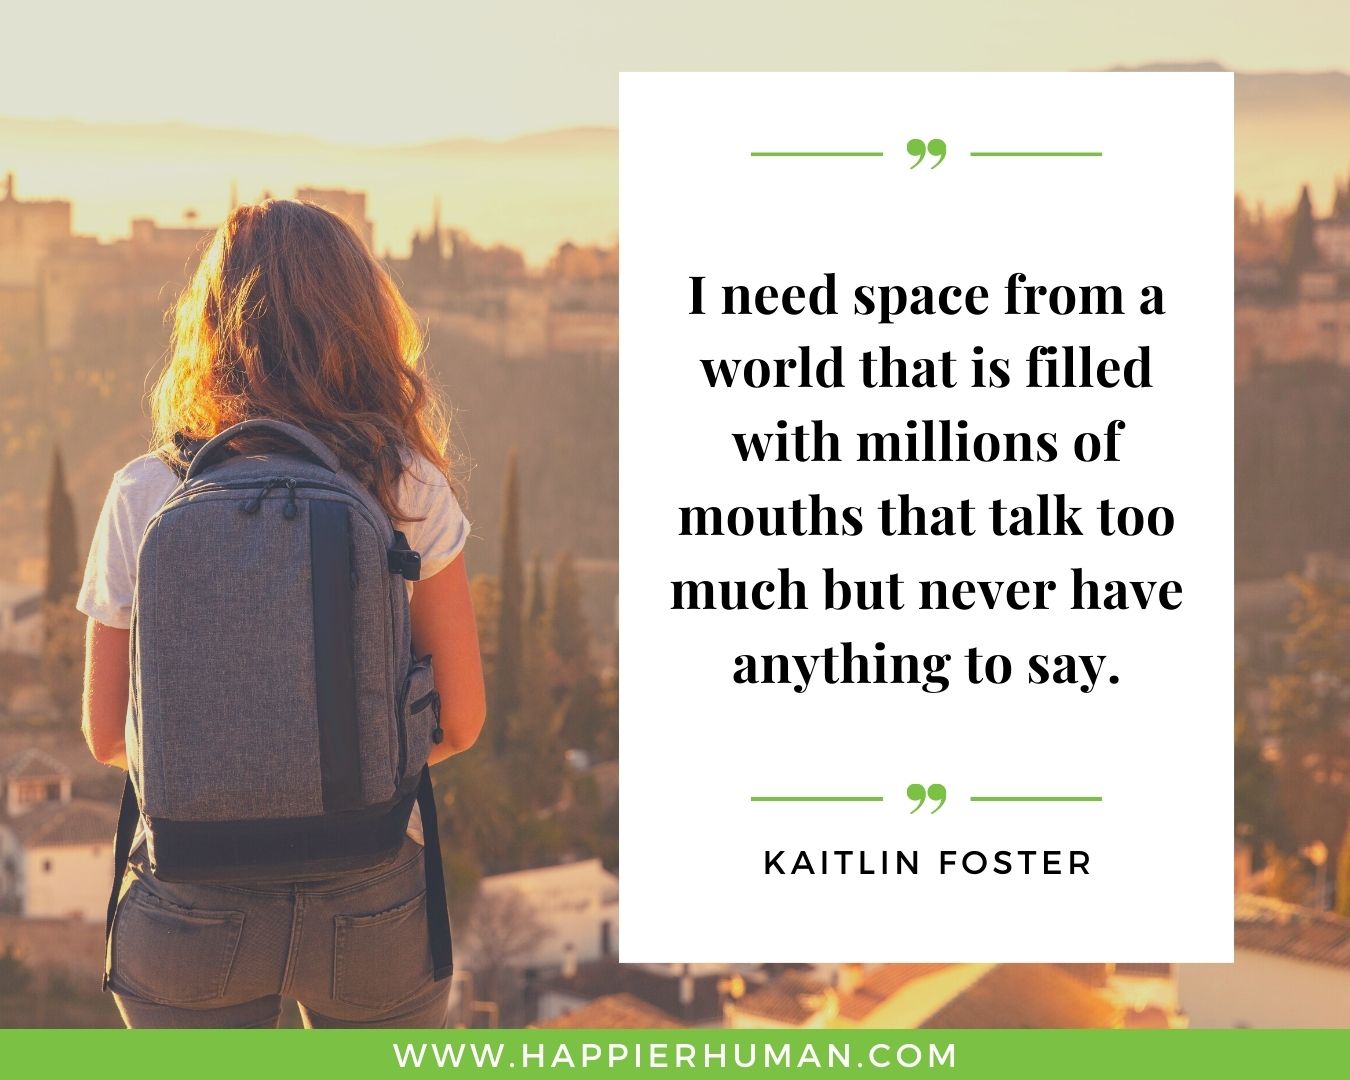 Introvert Quotes - “I need space from a world that is filled with millions of mouths that talk too much but never have anything to say.” – Kaitlin Foster